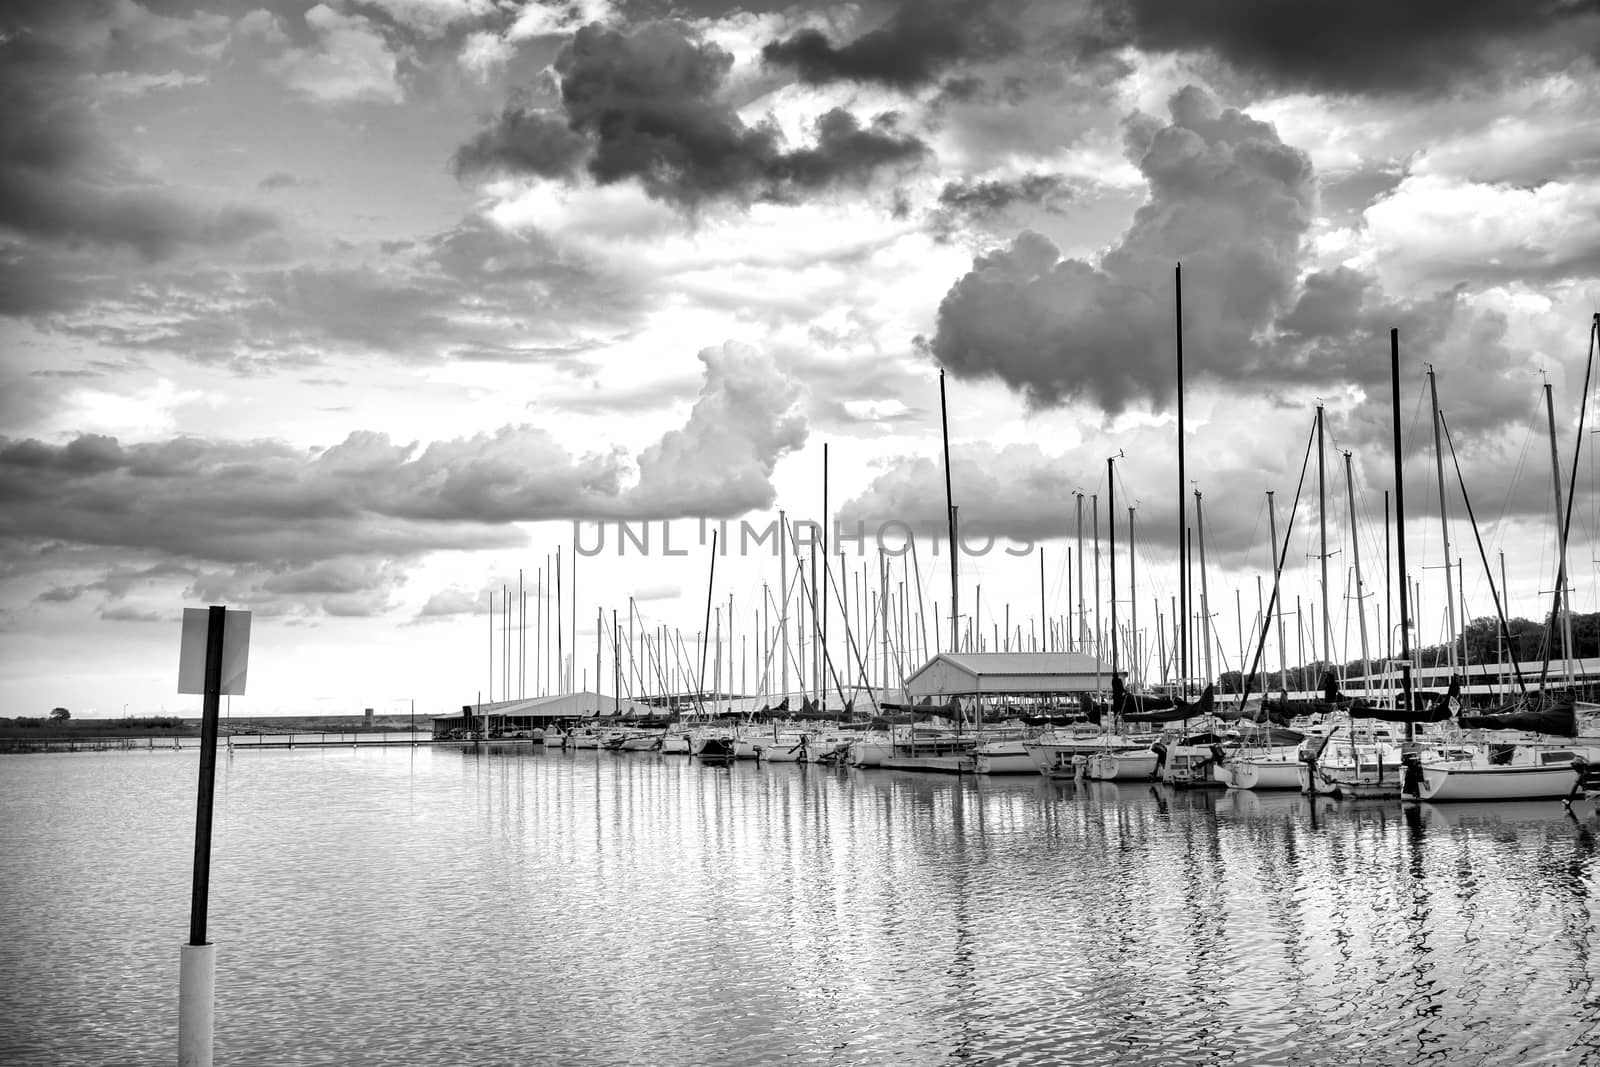 Storm Sky In Black & White by leieng